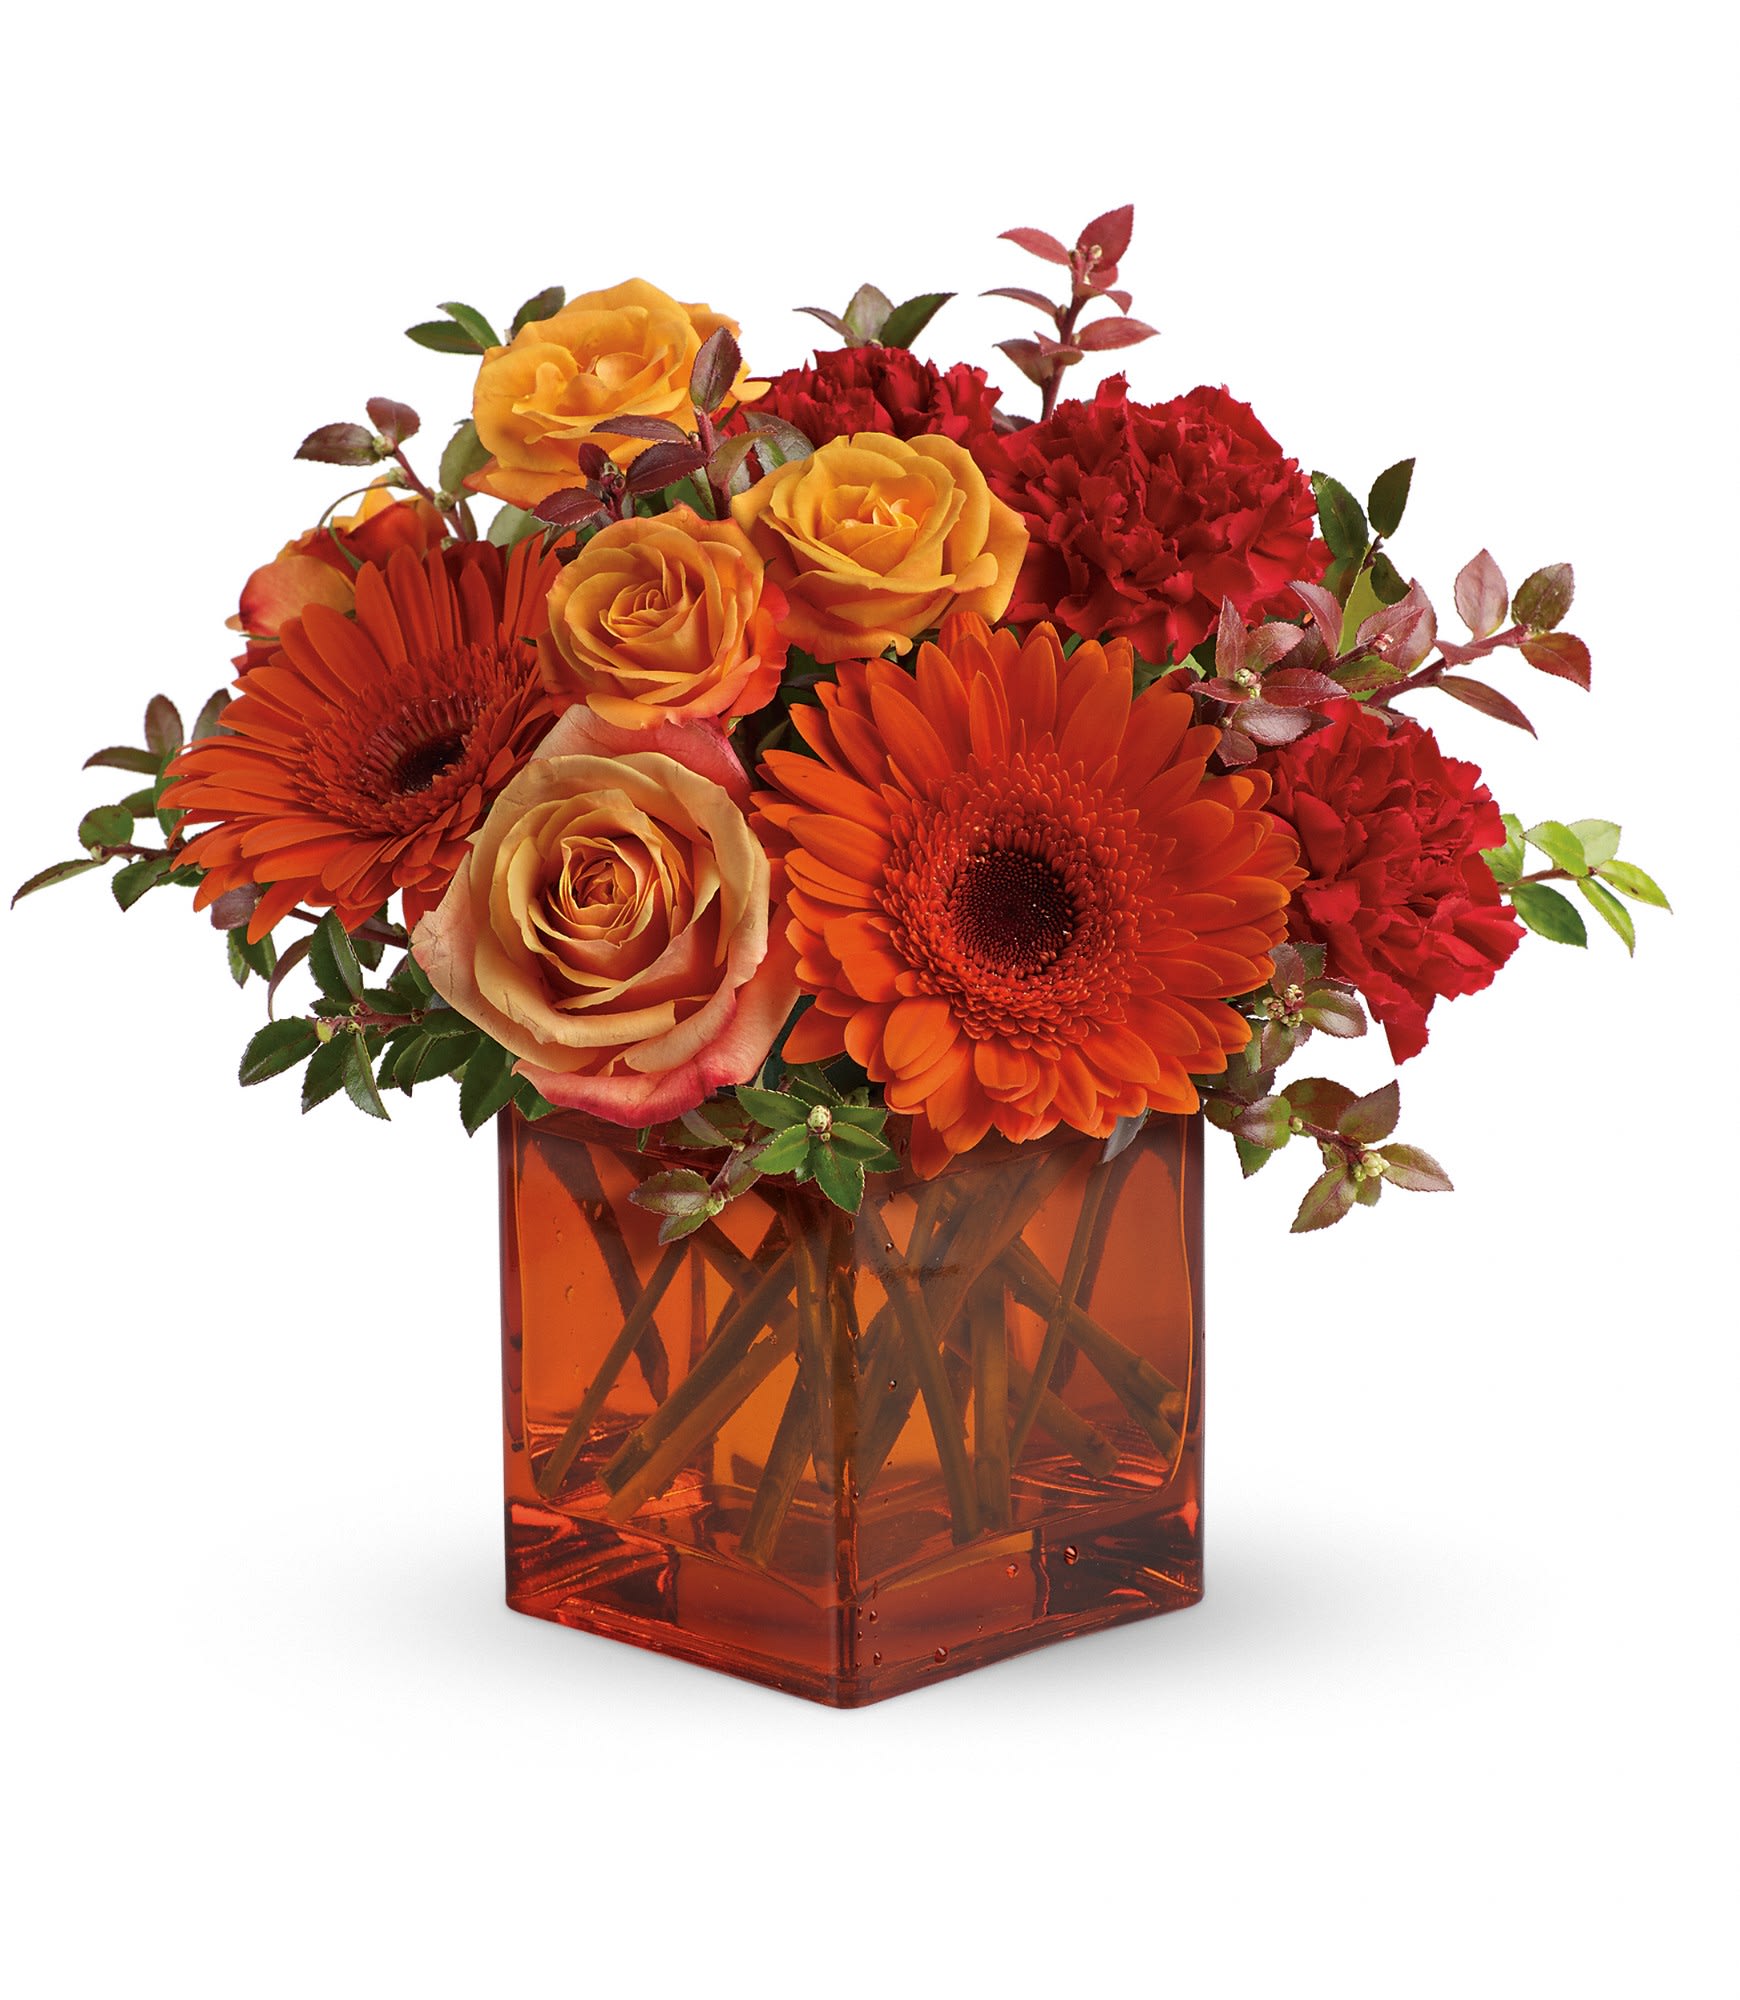 Teleflora's Sunrise Sunset - Sunrise, sunset, swiftly fly the days. So don't let another day go by without letting someone you know that you are thinking of them. This delightful arrangement will brighten anyone's morning, noon and night.  Fiery orange roses, spray roses and gerberas plus red carnations and huckleberry, are arranged in an exclusive orange cube vase. This arrangement is bound to get glowing reviews and thank-yous!  Orientation: One-Sided  